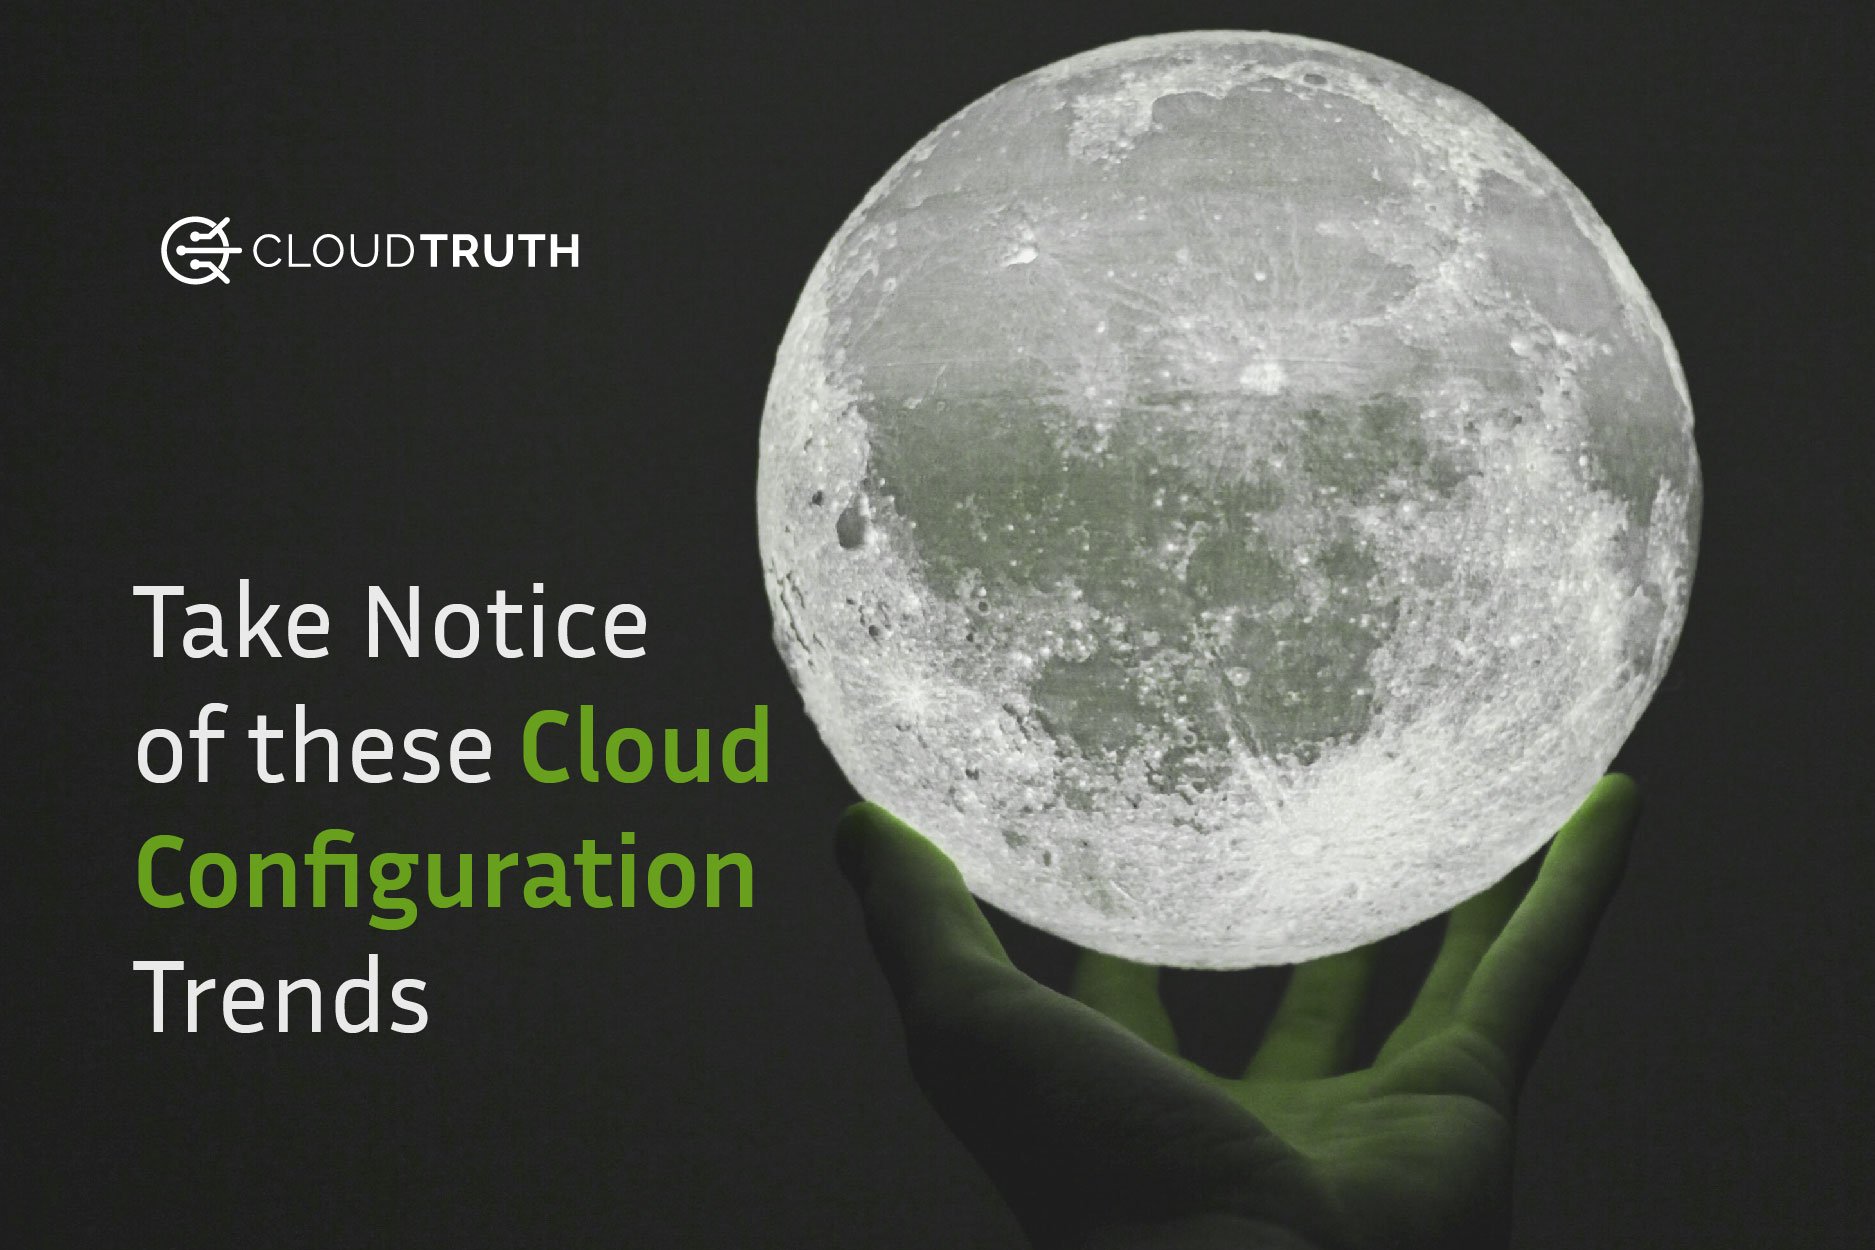 Emerging Cloud Configuration Trends You Should Take Notice Of